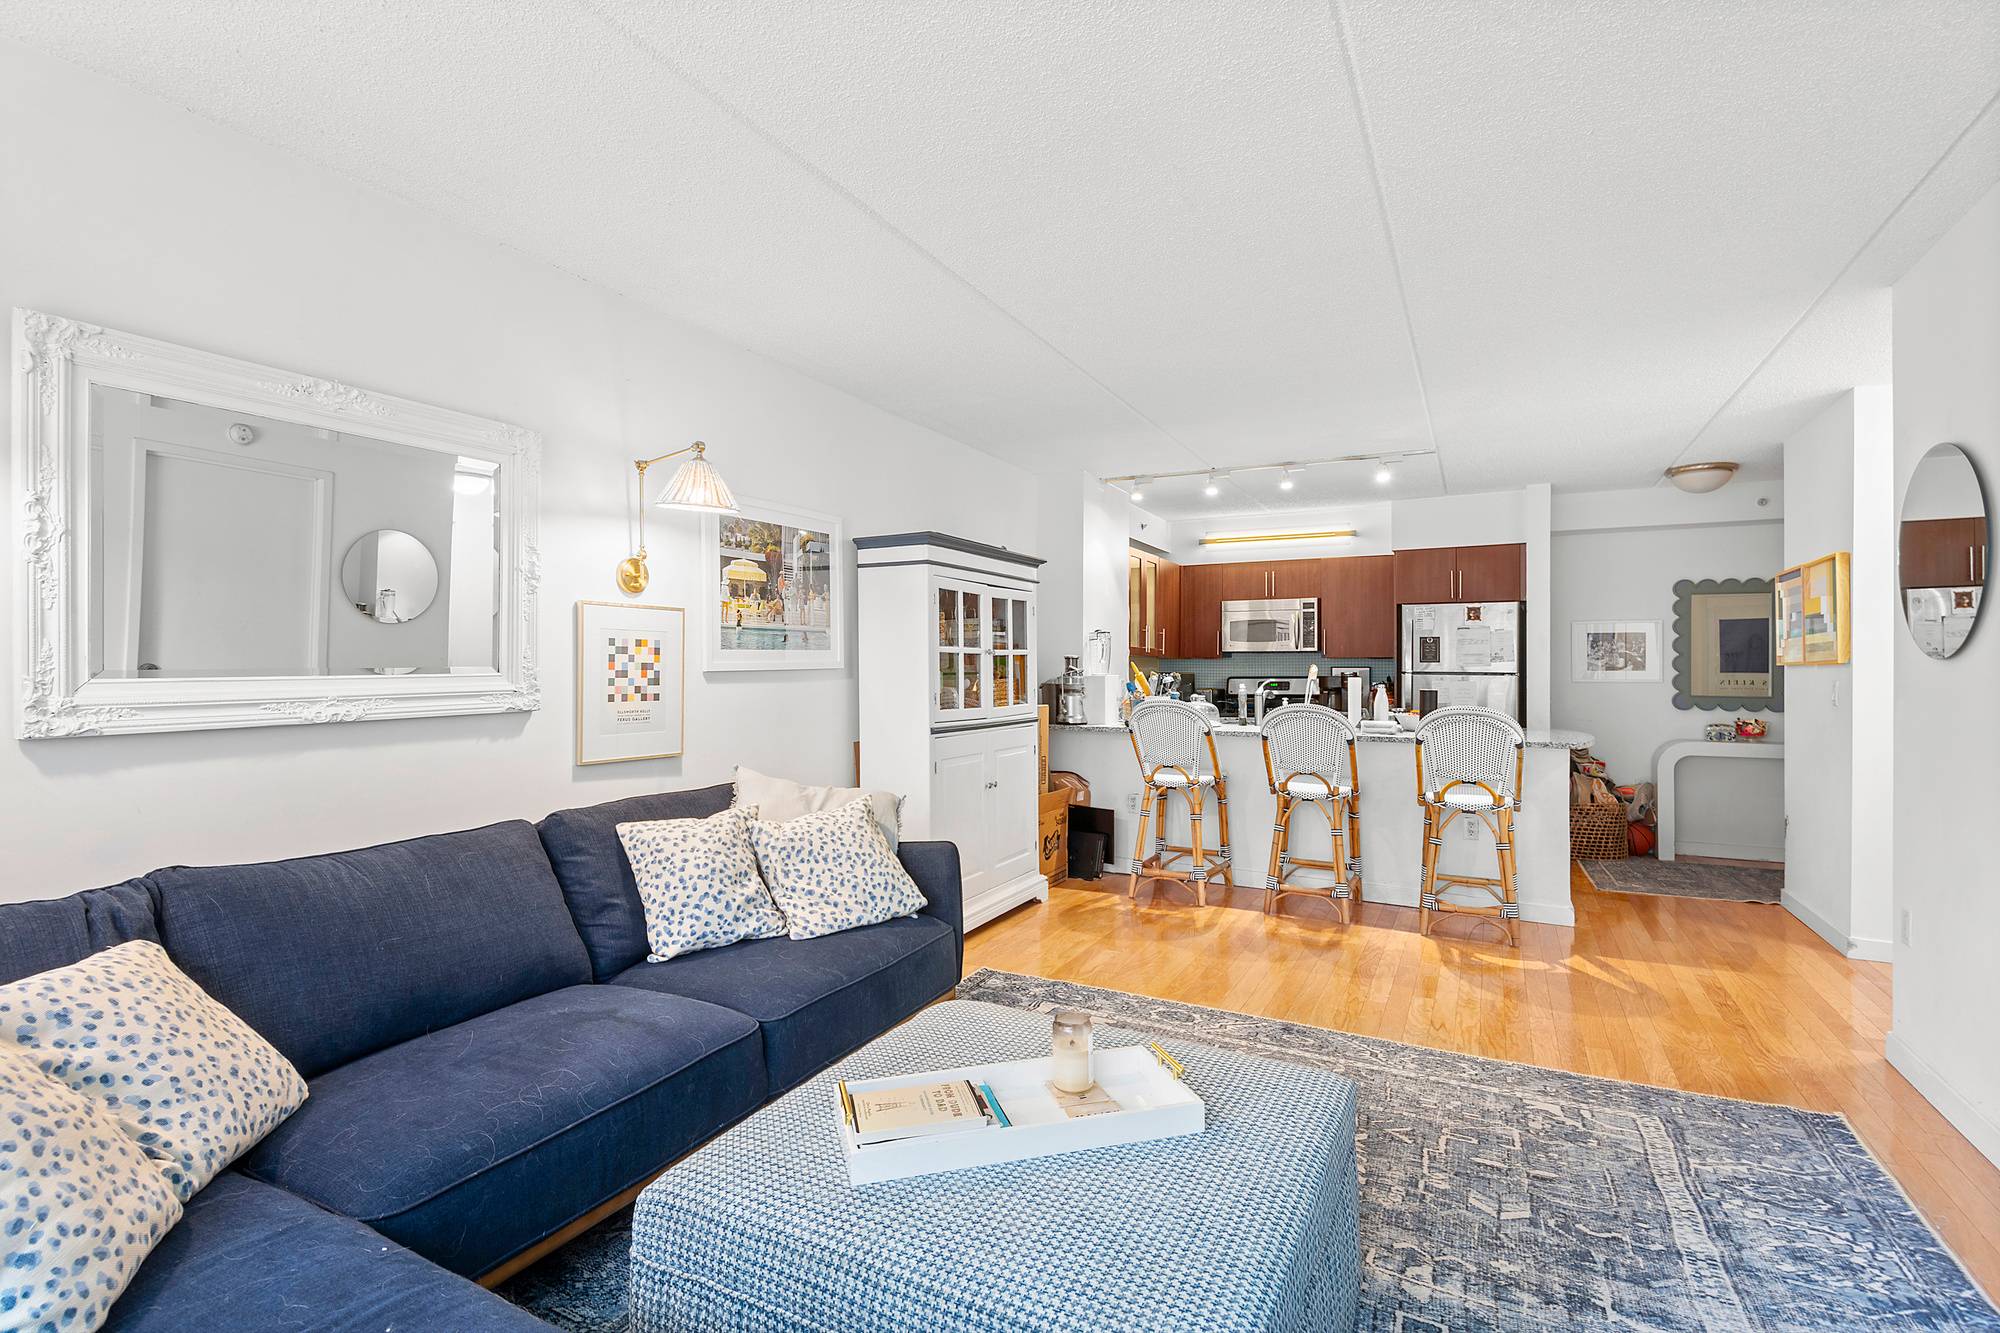 Welcome to 555 W 23rd Street Unit N5E This charming 1 bedroom apartment is situated in the vibrant and trendy West Chelsea neighborhood, known for its art galleries, eclectic dining ...